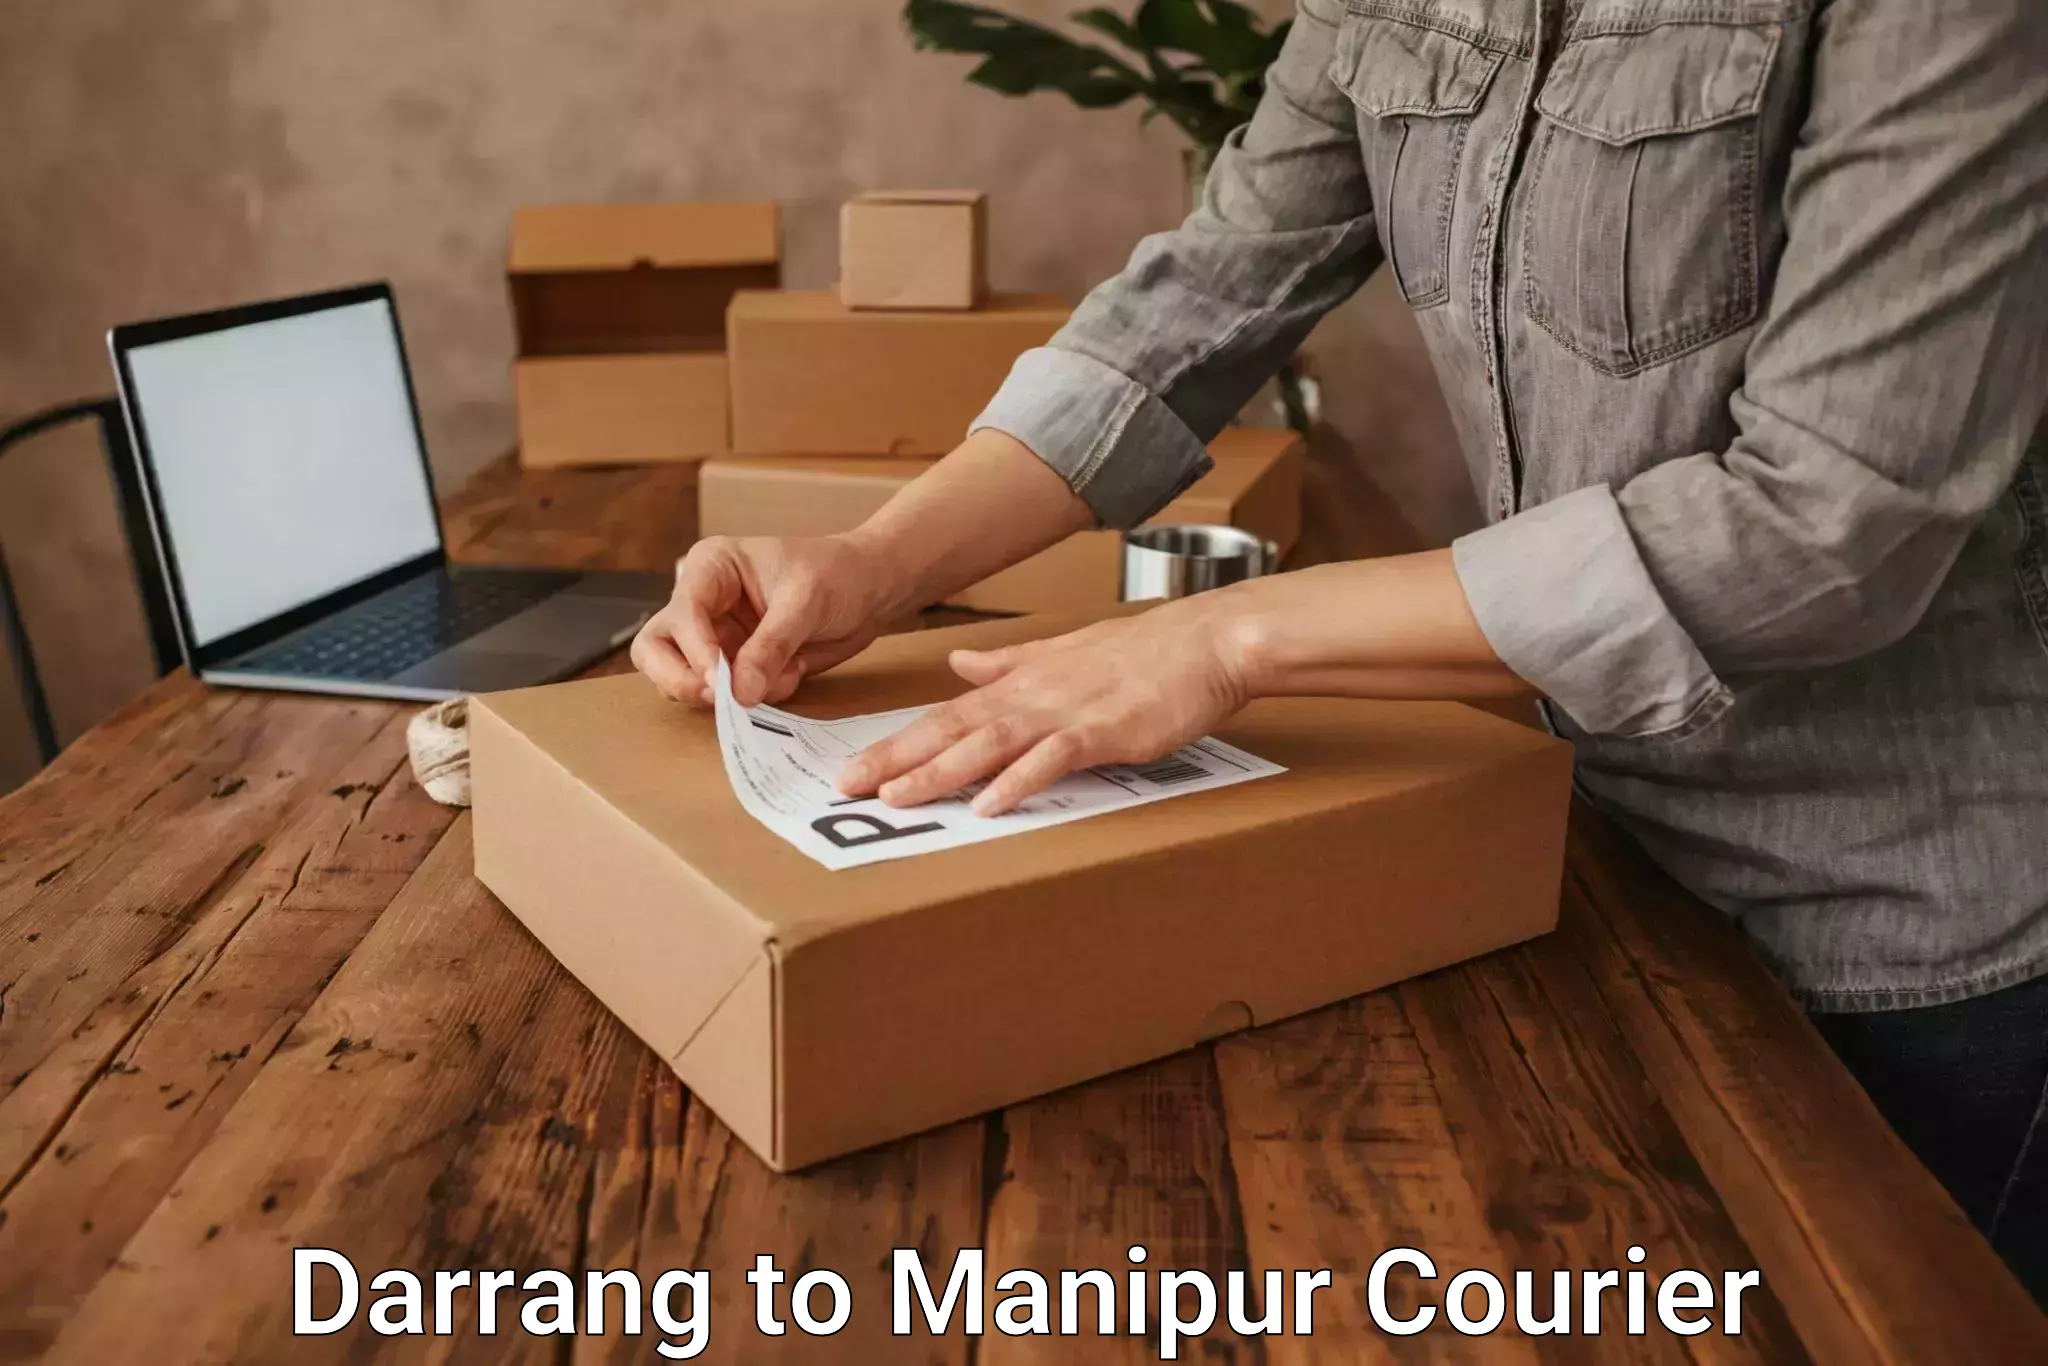 Nationwide delivery network Darrang to Manipur